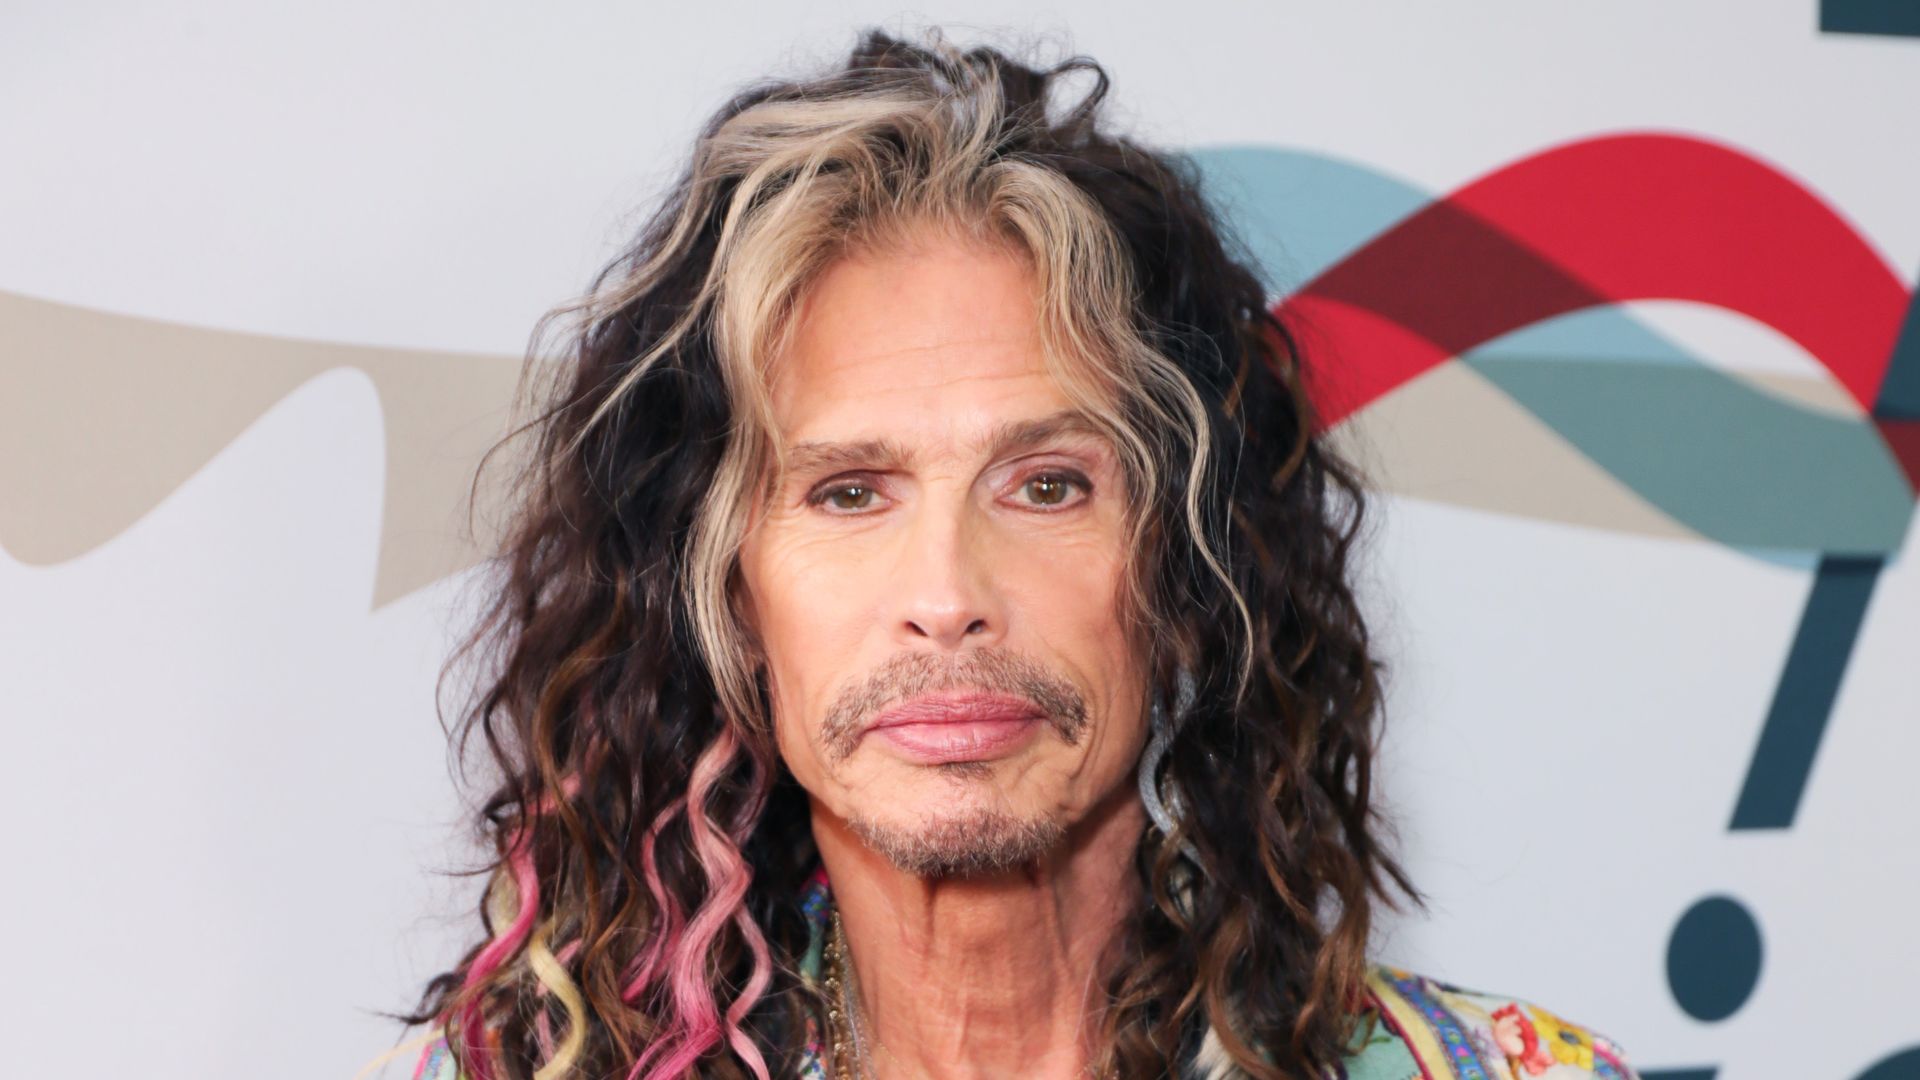 Steven Tyler arrives at Steven Tyler's Third Annual Grammy Awards Viewing Party to benefit Janieâs Fund presented by Live Nation at Raleigh Studios on January 26, 2020 in Los Angeles, California